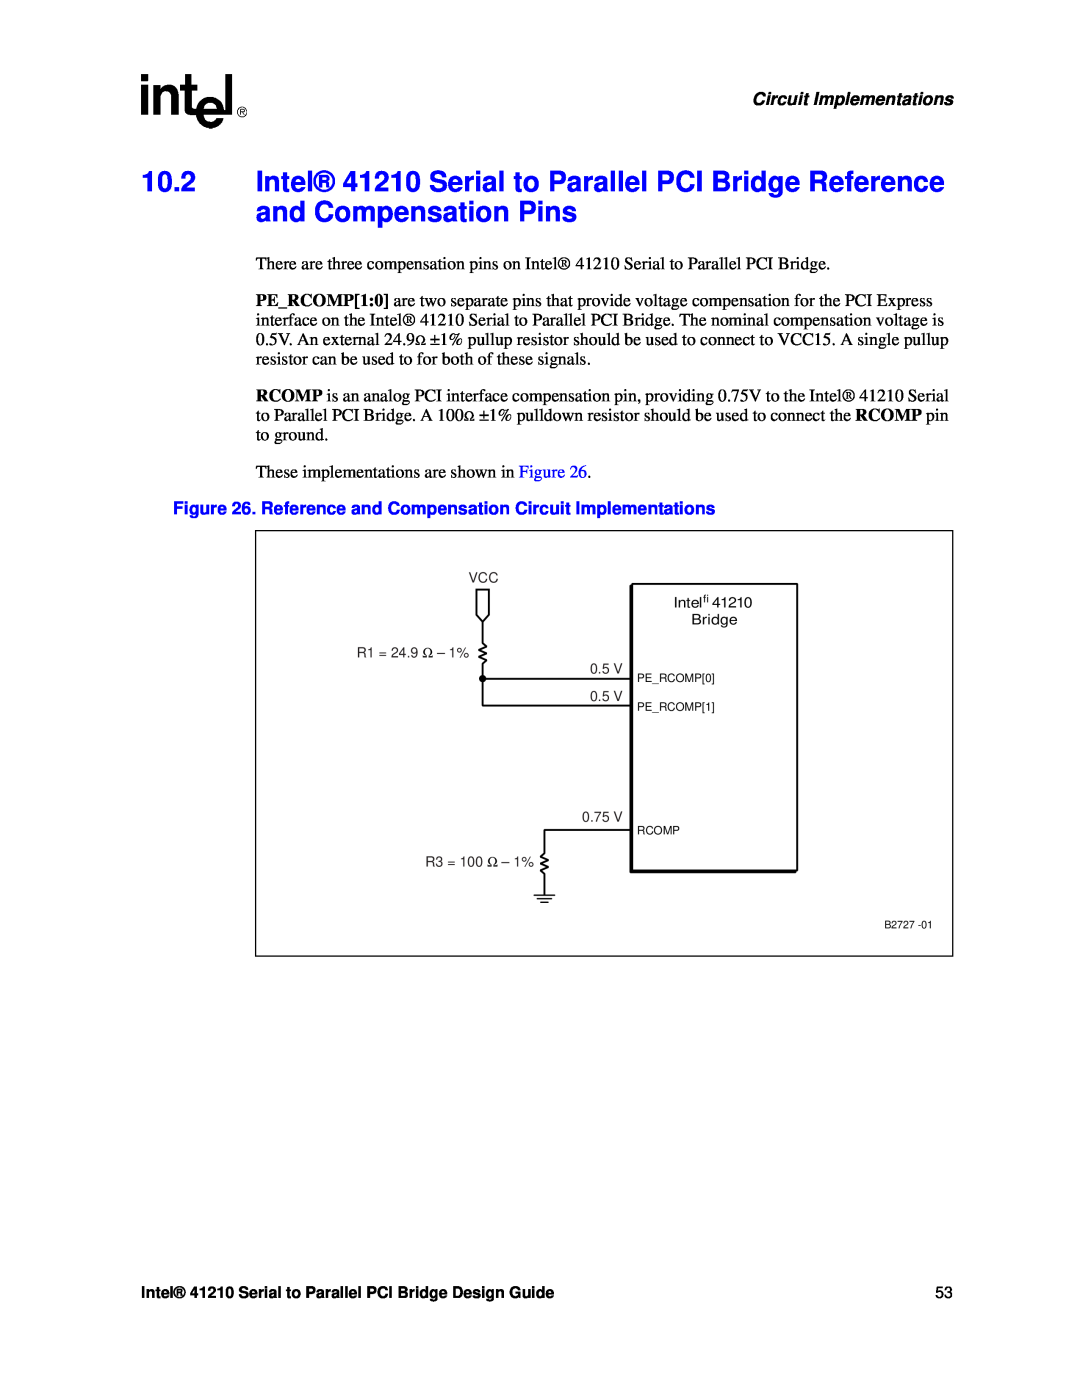 Intel 41210 manual Reference and Compensation Circuit Implementations 